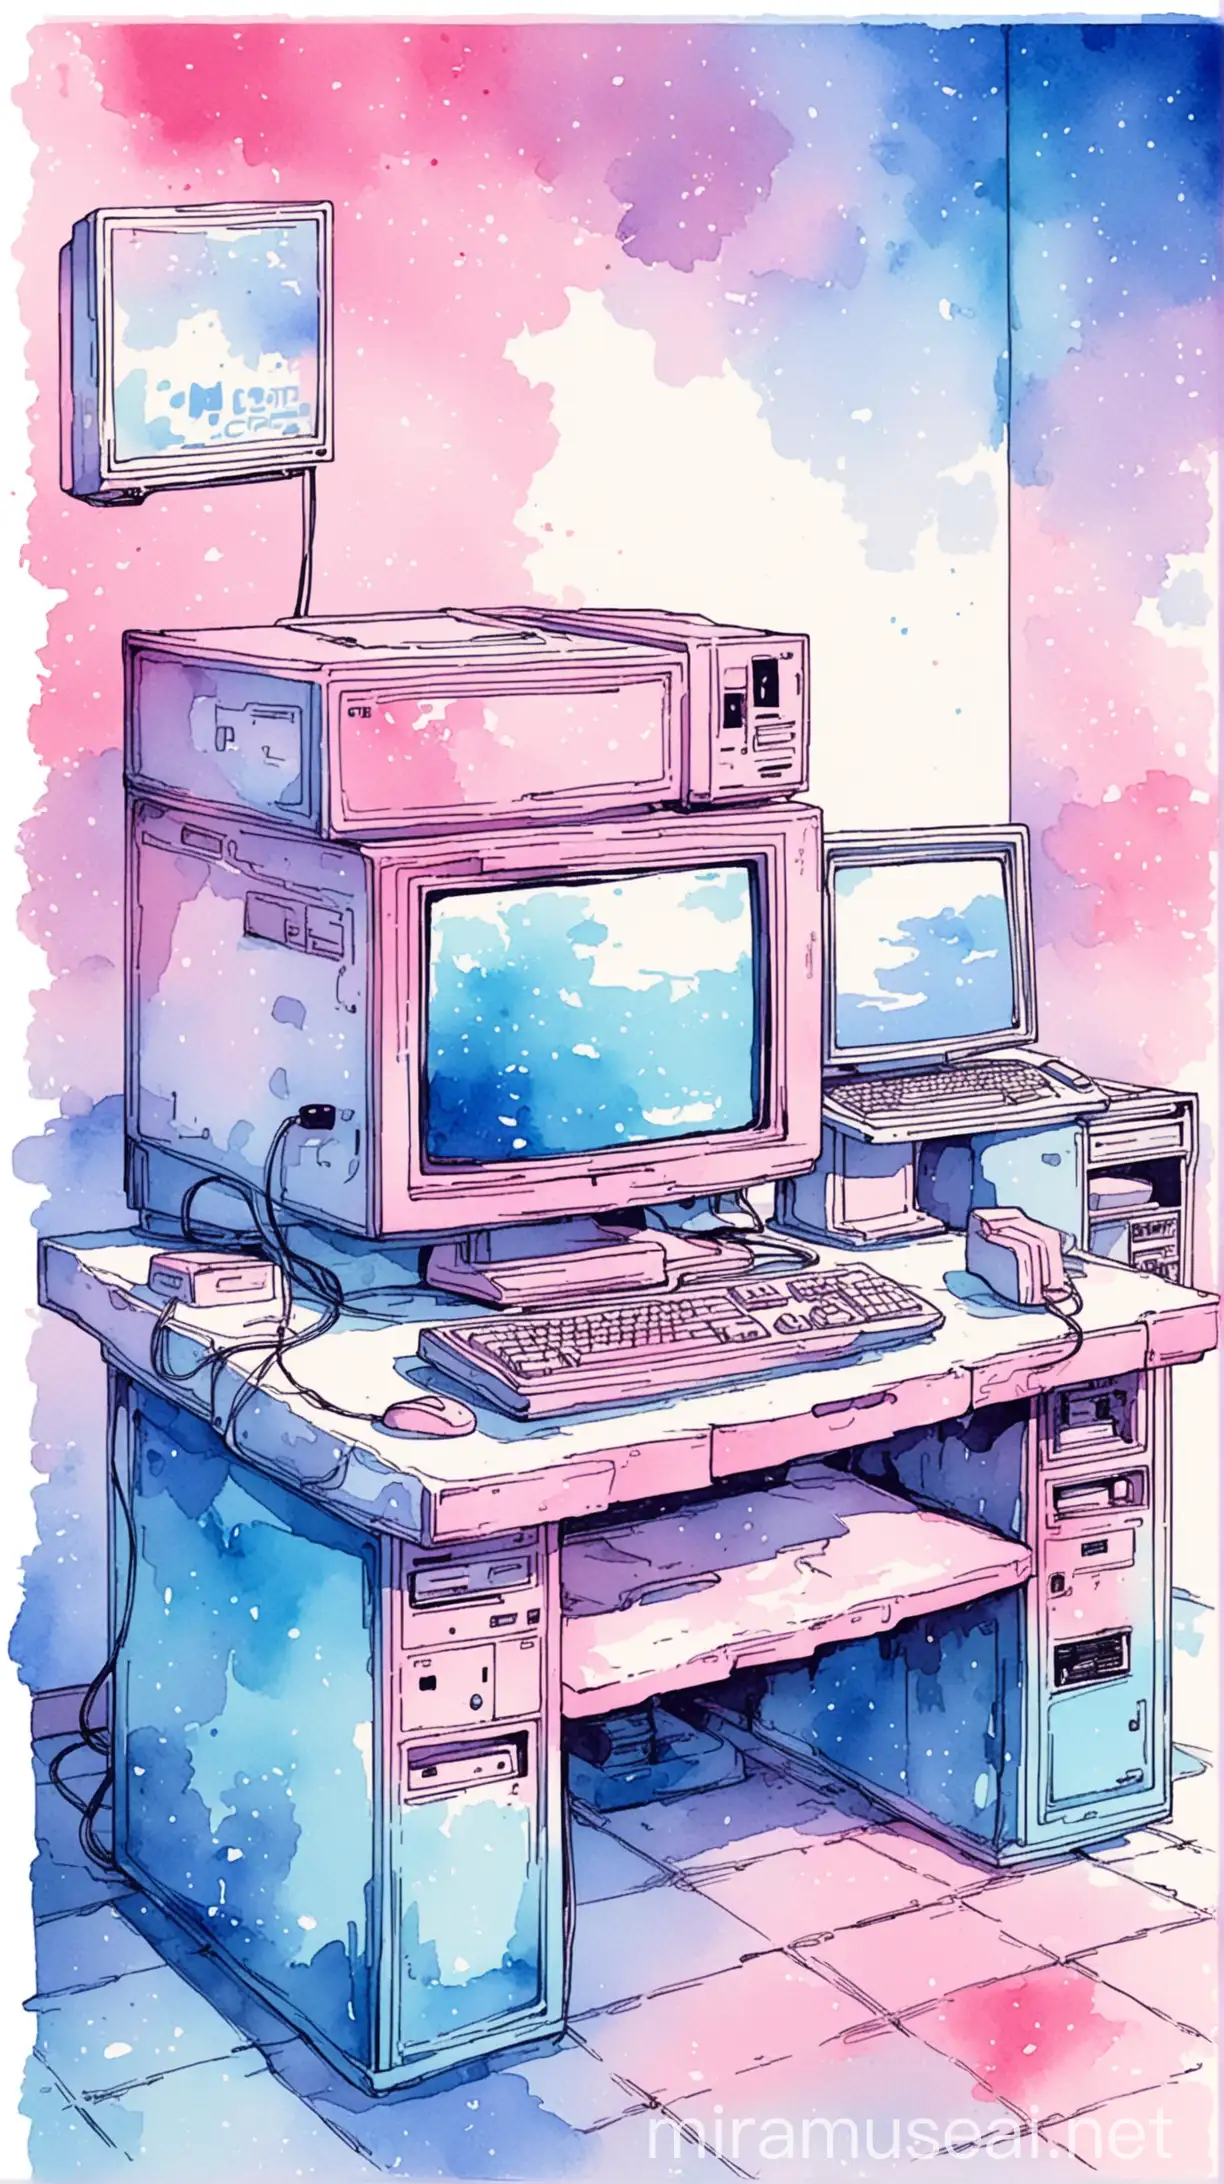 vector cute aesthetic anime watercolor art, old computer, cyber cafe, retro pink blue color